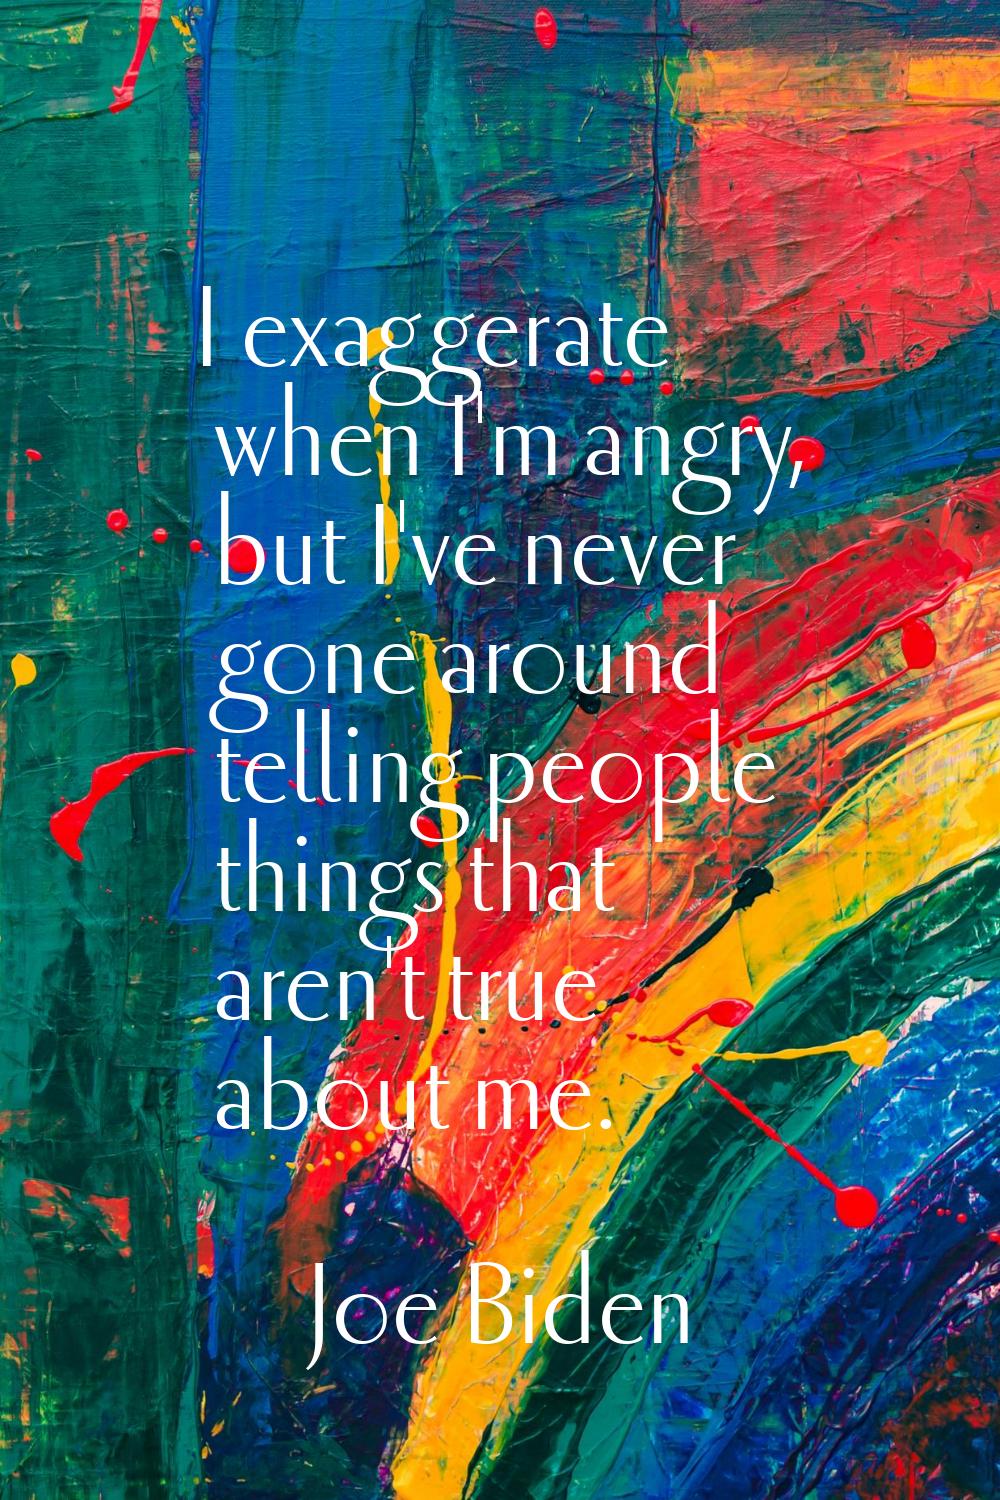 I exaggerate when I'm angry, but I've never gone around telling people things that aren't true abou